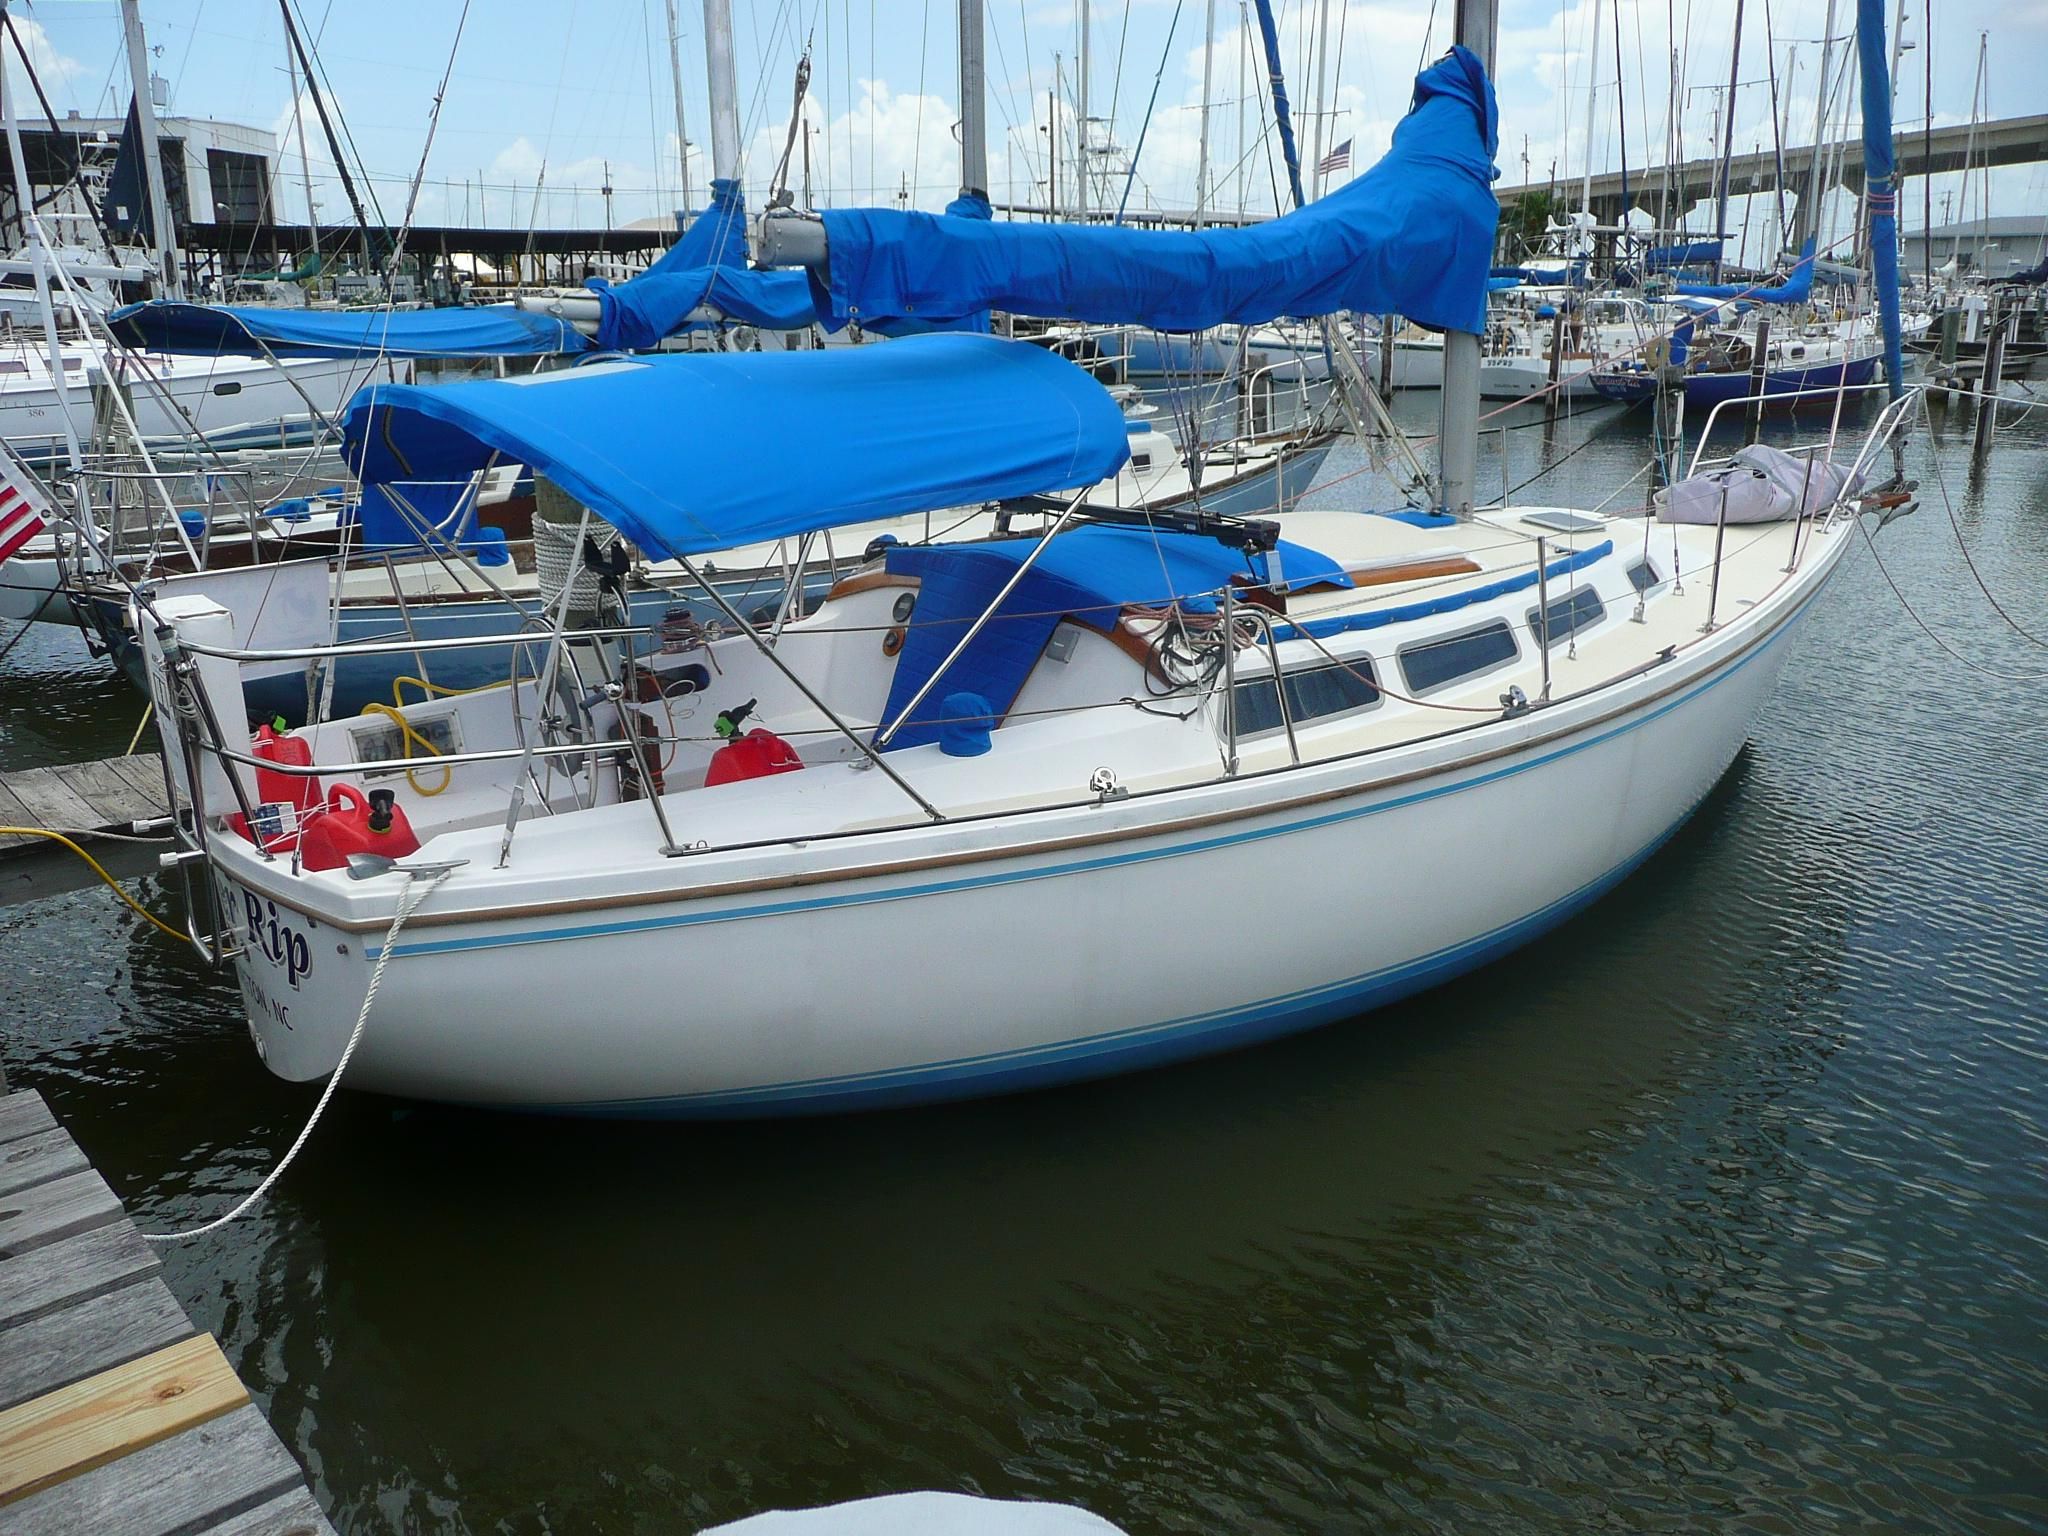 30 ft catalina sailboat for sale